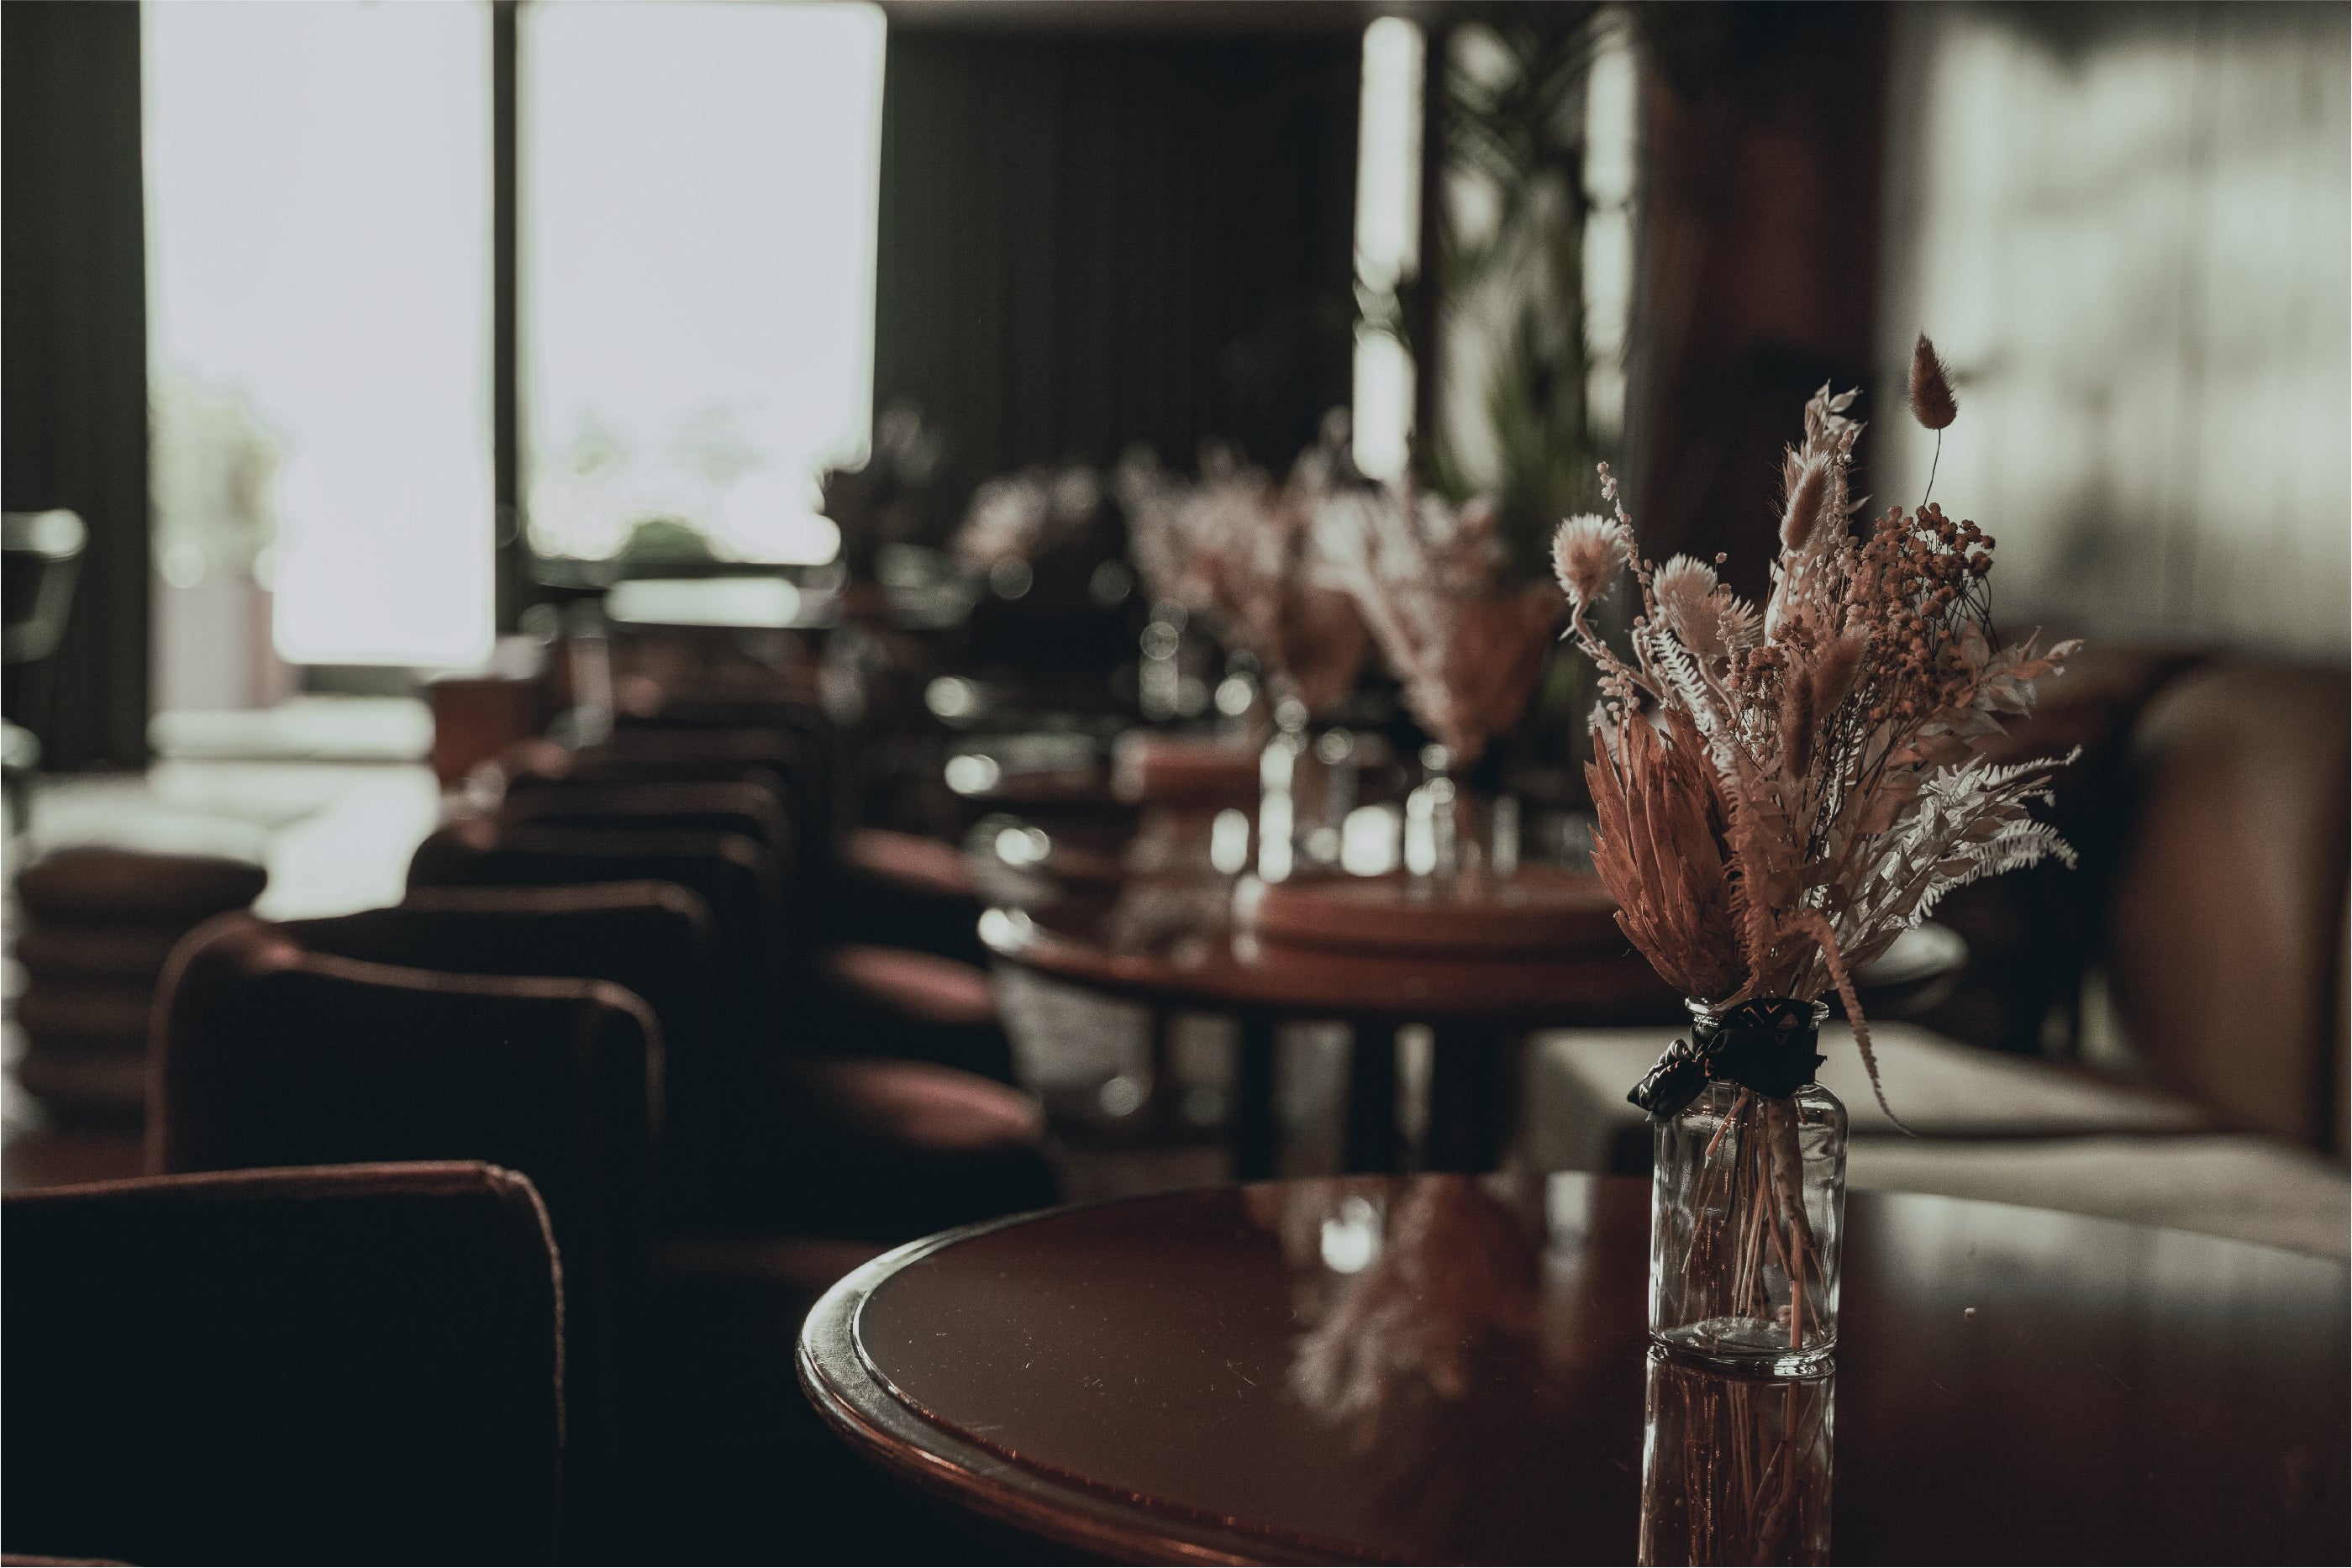 Amaranté's bespoke floral arrangements line the centre of polished mahogany tables, their blush and copper tones creating a warm, welcoming ambience, set against the luxurious backdrop of White City House's lounge with natural light streaming through large windows.